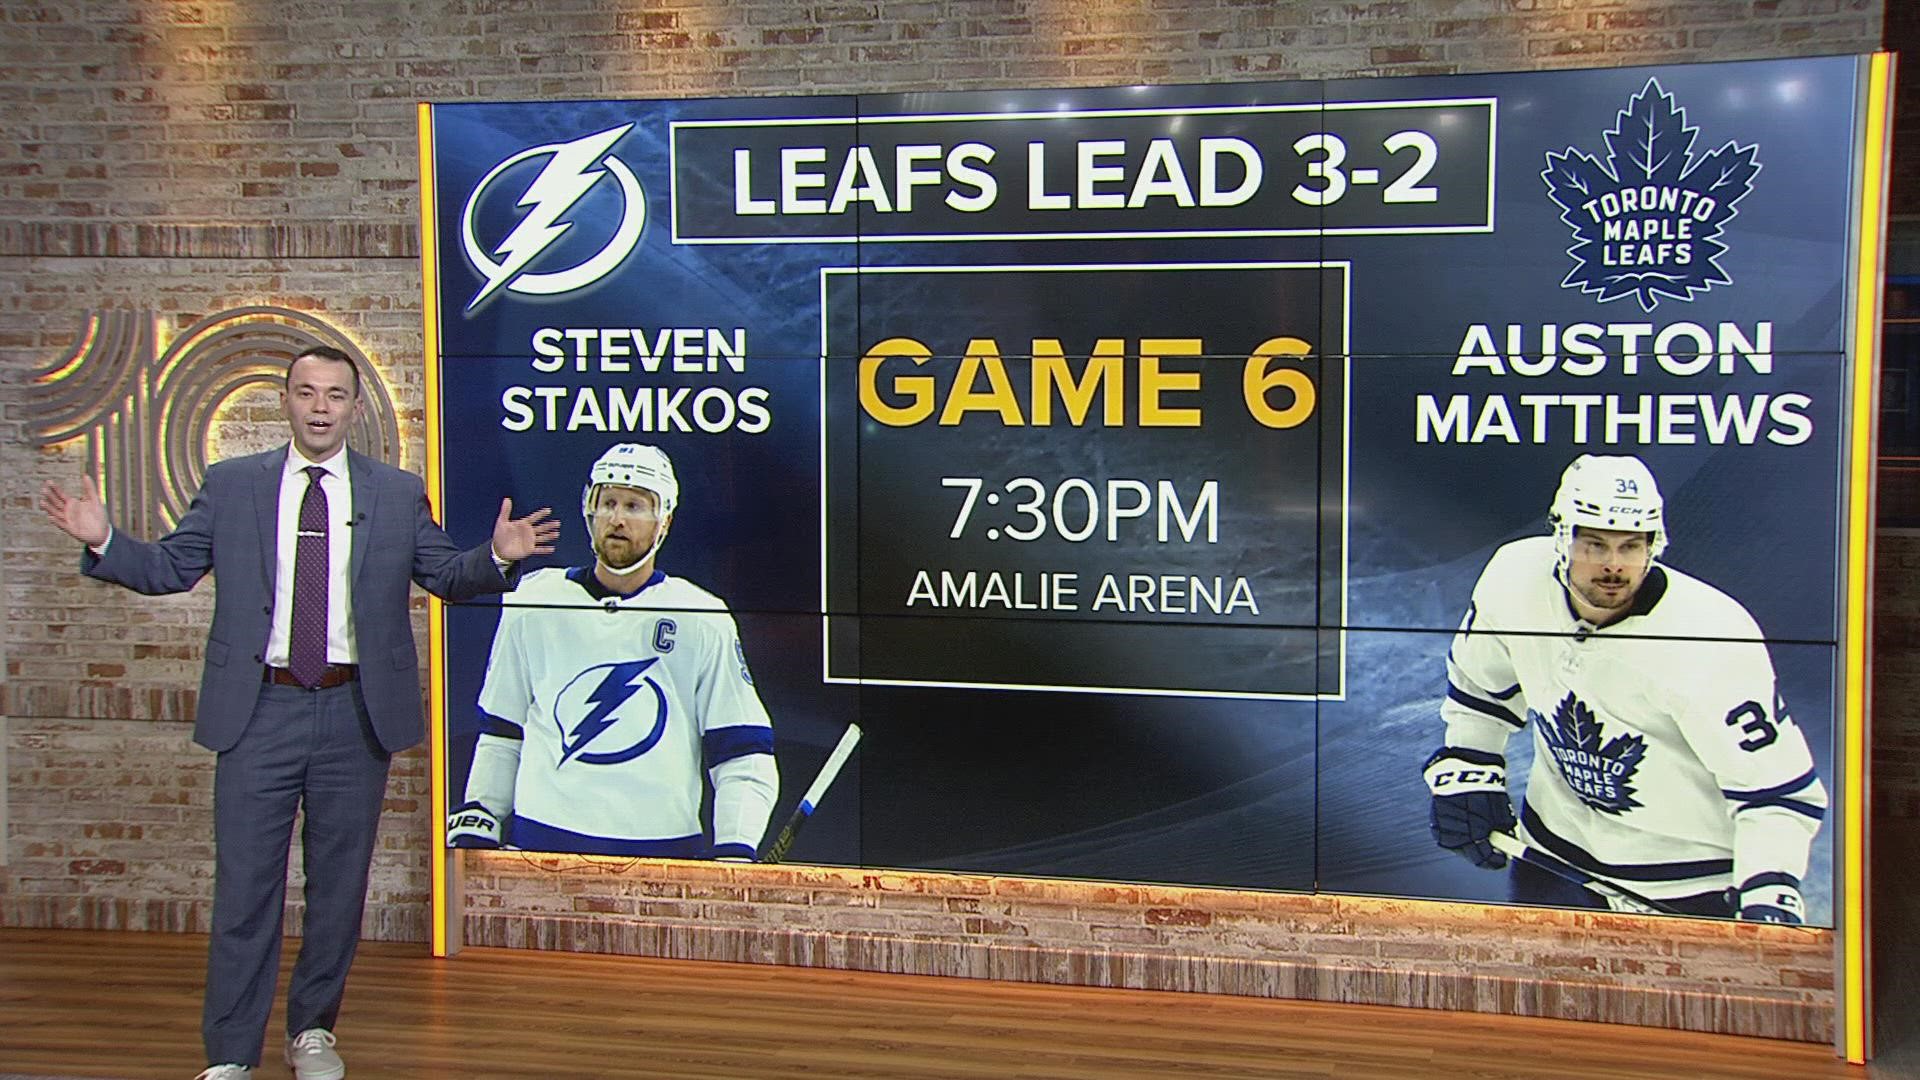 The Lightning started the game with two shots early but couldn't hold on as the clock struck zero.